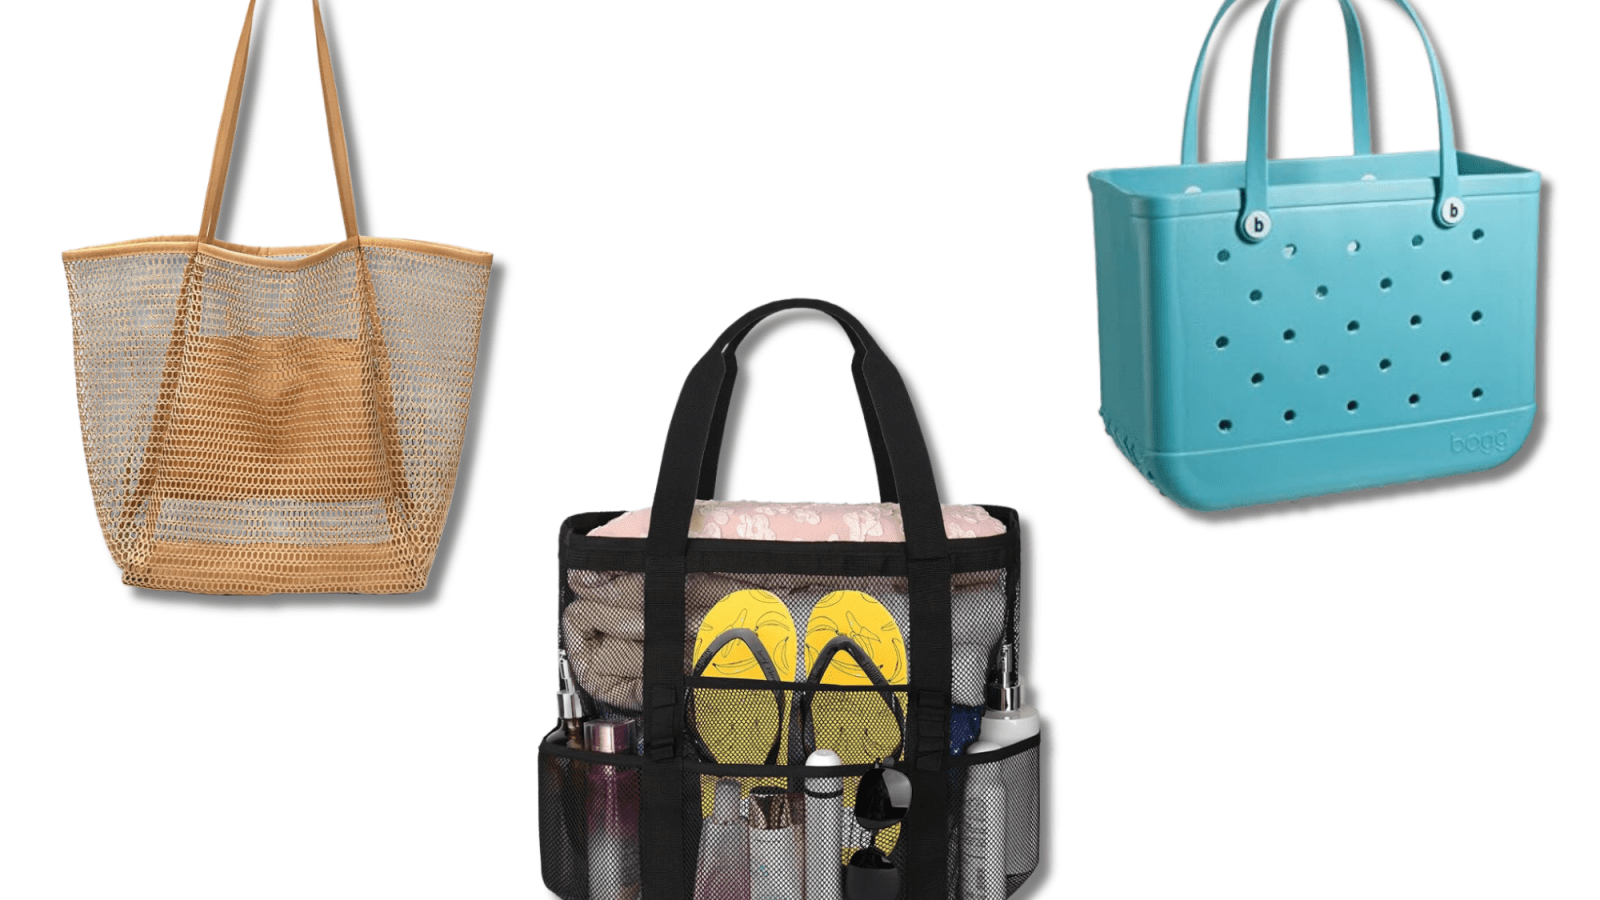 17 of the Best Beach Totes To Help You Prep for an Eventful Summer